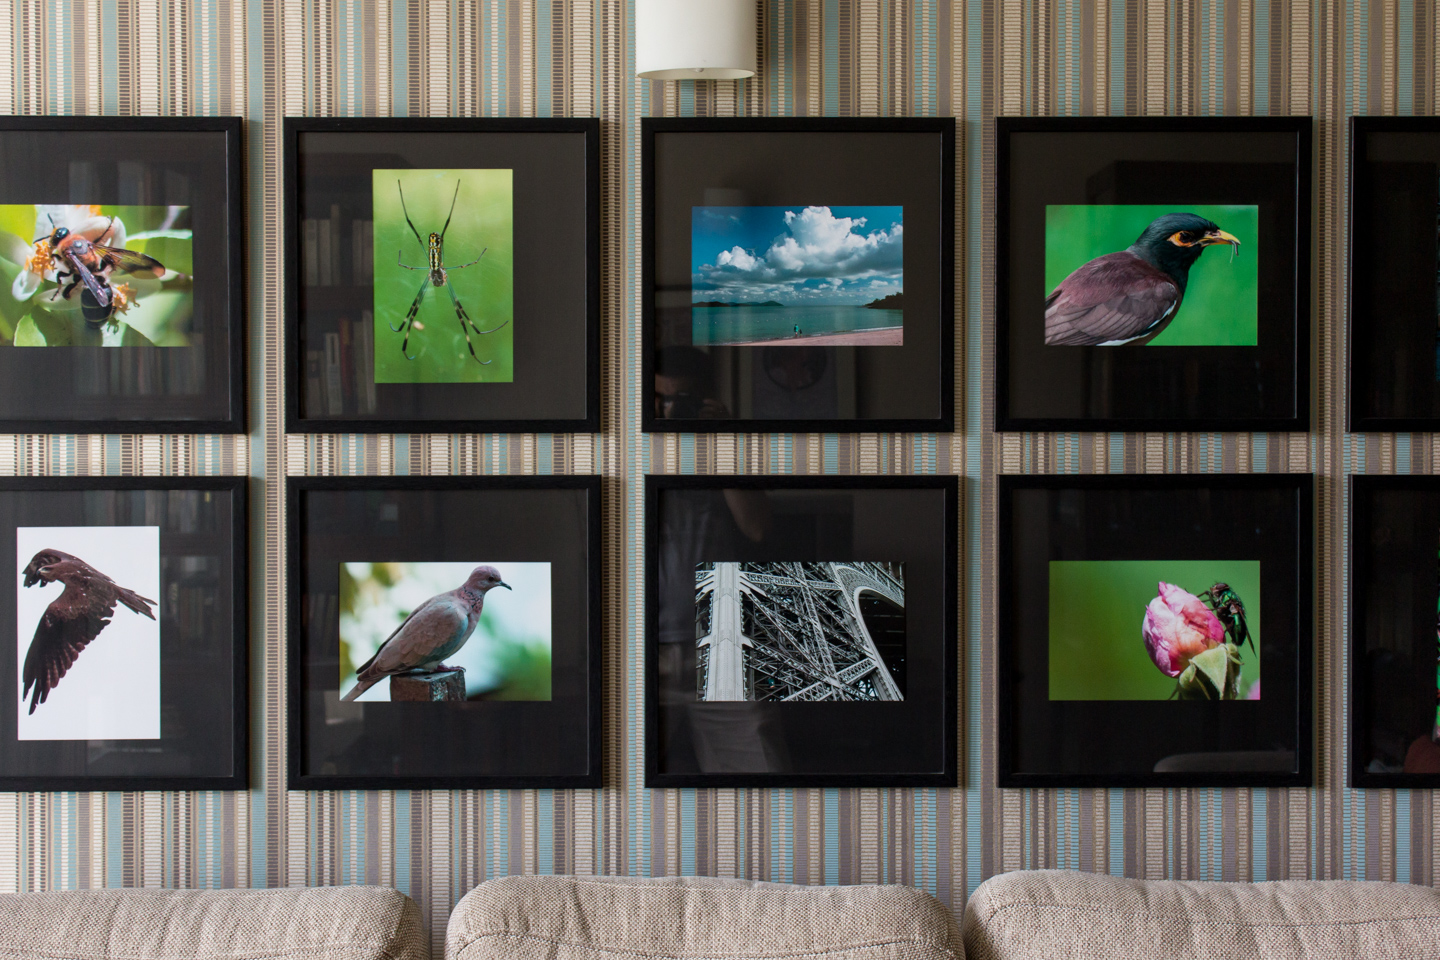 Colourful photographs add a vibrant note to the drawing room.